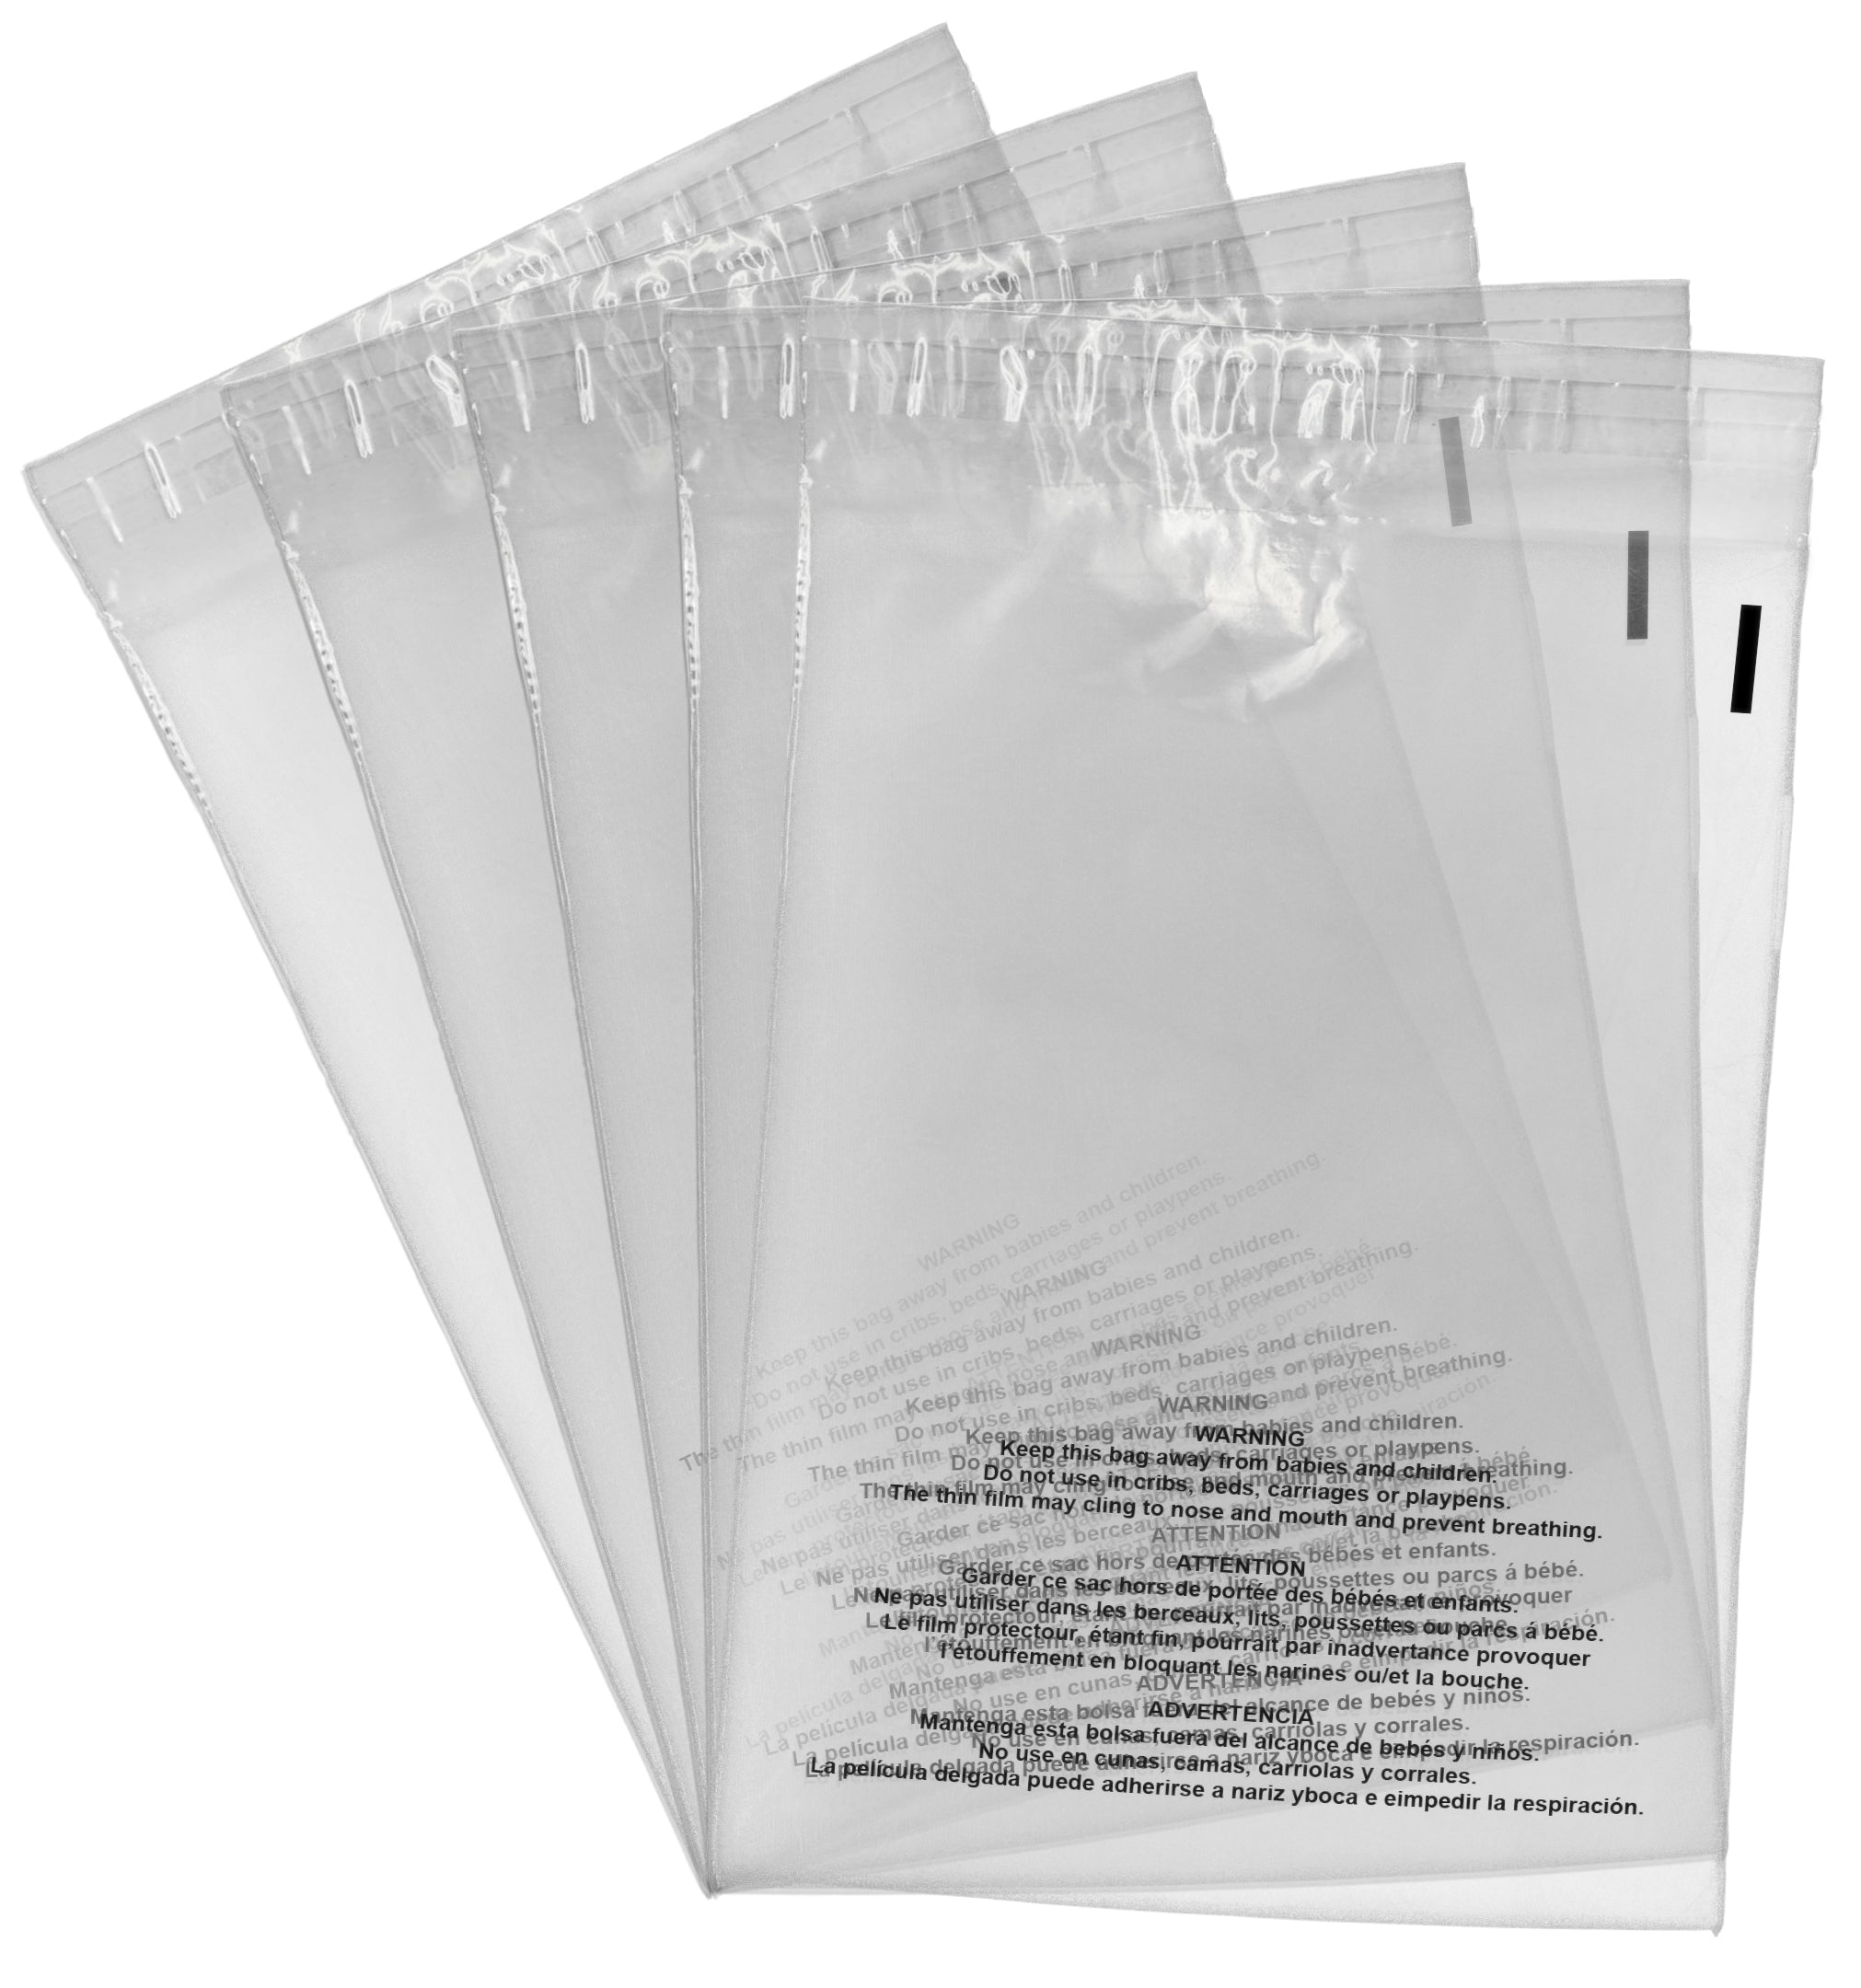 Poly Bags Size Combo Pack with Suffocation Warning by Retail Supply Co